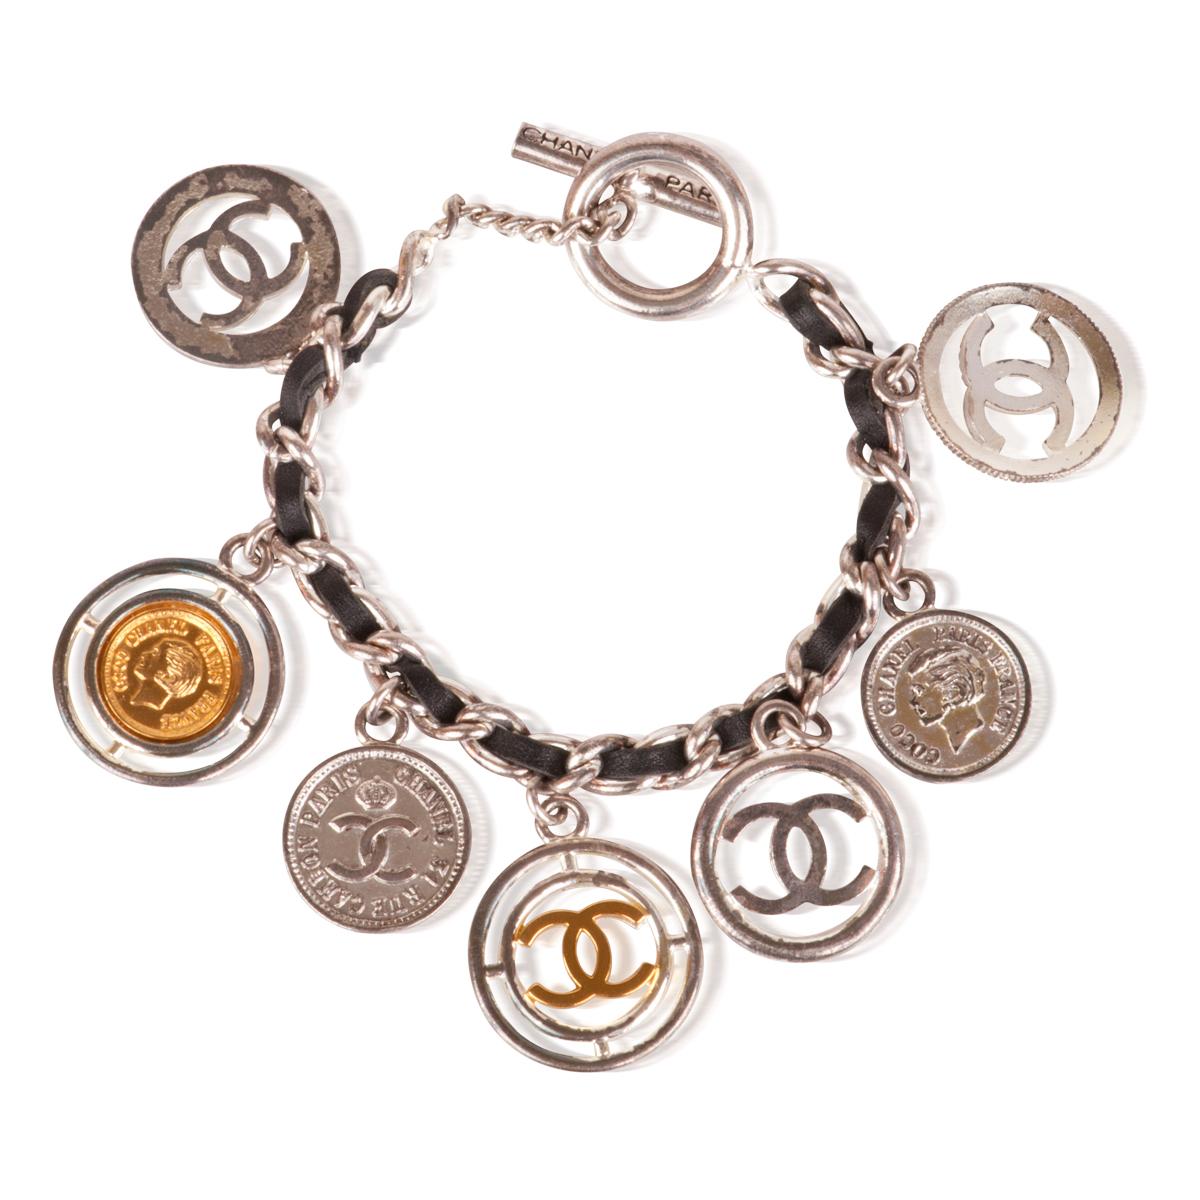 Pre-owned vintage Chanel silver-tone leather CC logo coin charm bracelet, made in France, 1997. 

The bracelet is from the Chanel Spring 1997 collection. It is very classic, in good pre-owned condition, and great for everyday wear. The bracelet is